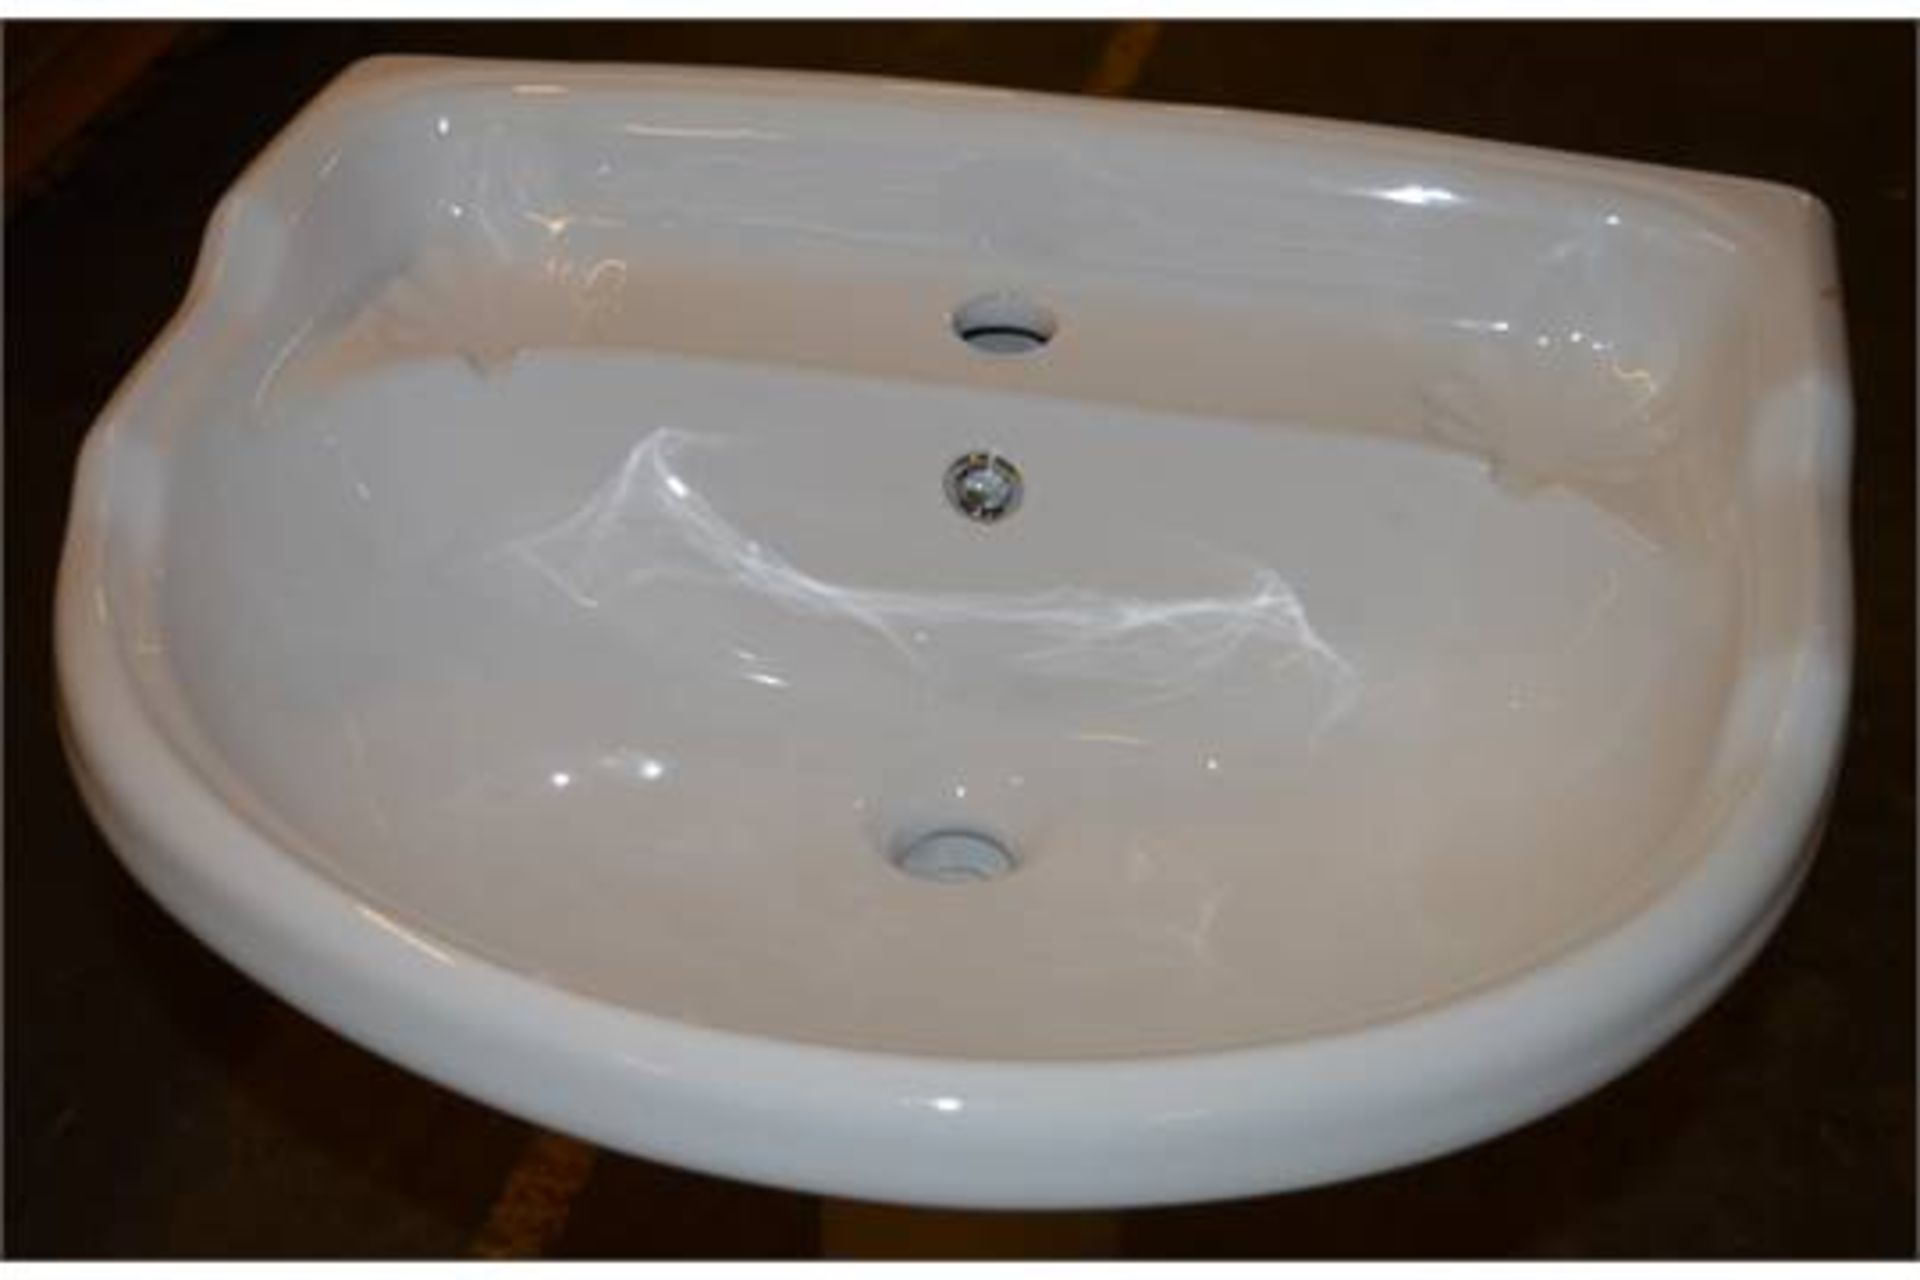 20 x Vogue Bathrooms ARBURY Two Tap Hole SINK BASINS With Pedestals - 580mm Width - Brand New - Image 2 of 2